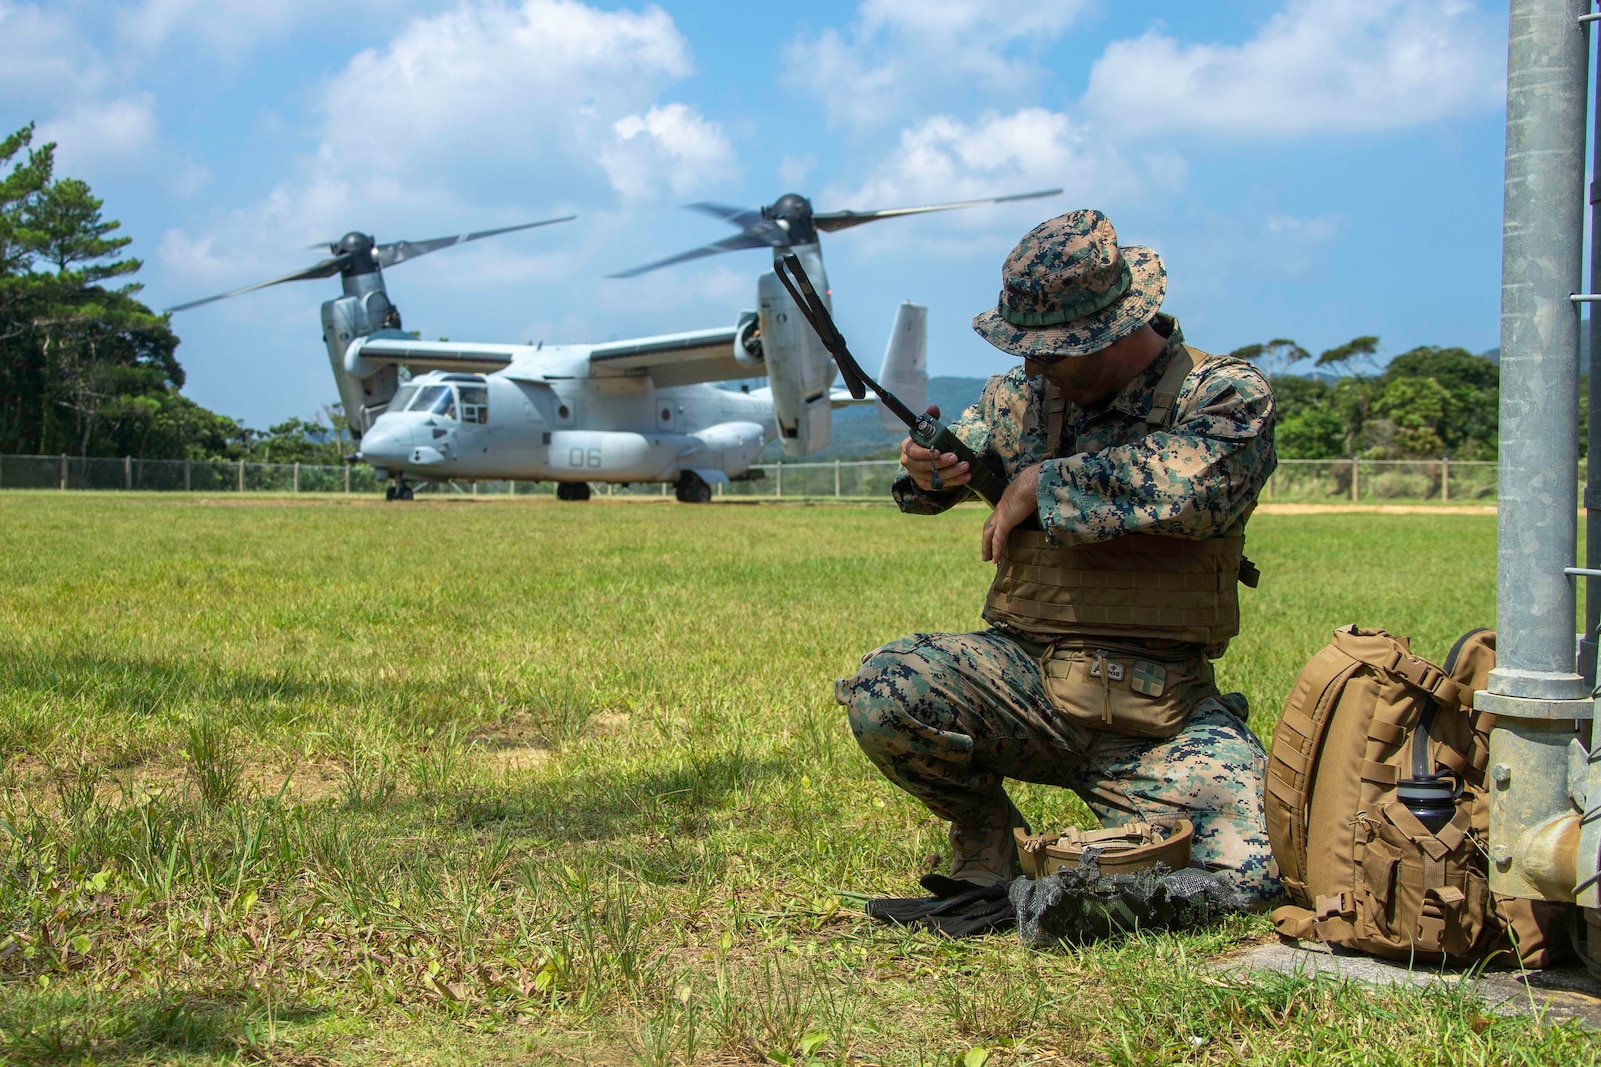 U.S. Marine Corps Staff Sgt. Devon Wheeler, a rifleman assigned to 2d Battalion, 3d Marines, 3d Marine Division, establishes communications during Indo-Pacific Warfighting Exercise in the Northern Training Area on Okinawa, Japan, August 31, 2021. This force-on-force exercise demonstrated the ability to seize and defend key-maritime terrain and provided an opportunity to employ techniques to rapidly establish forward arming and refueling points. 2/3 is currently attached to 4th Marines as a part of the Unit Deployment Program. (U.S. Marine Corps photo by Lance Cpl. Scott Aubuchon)